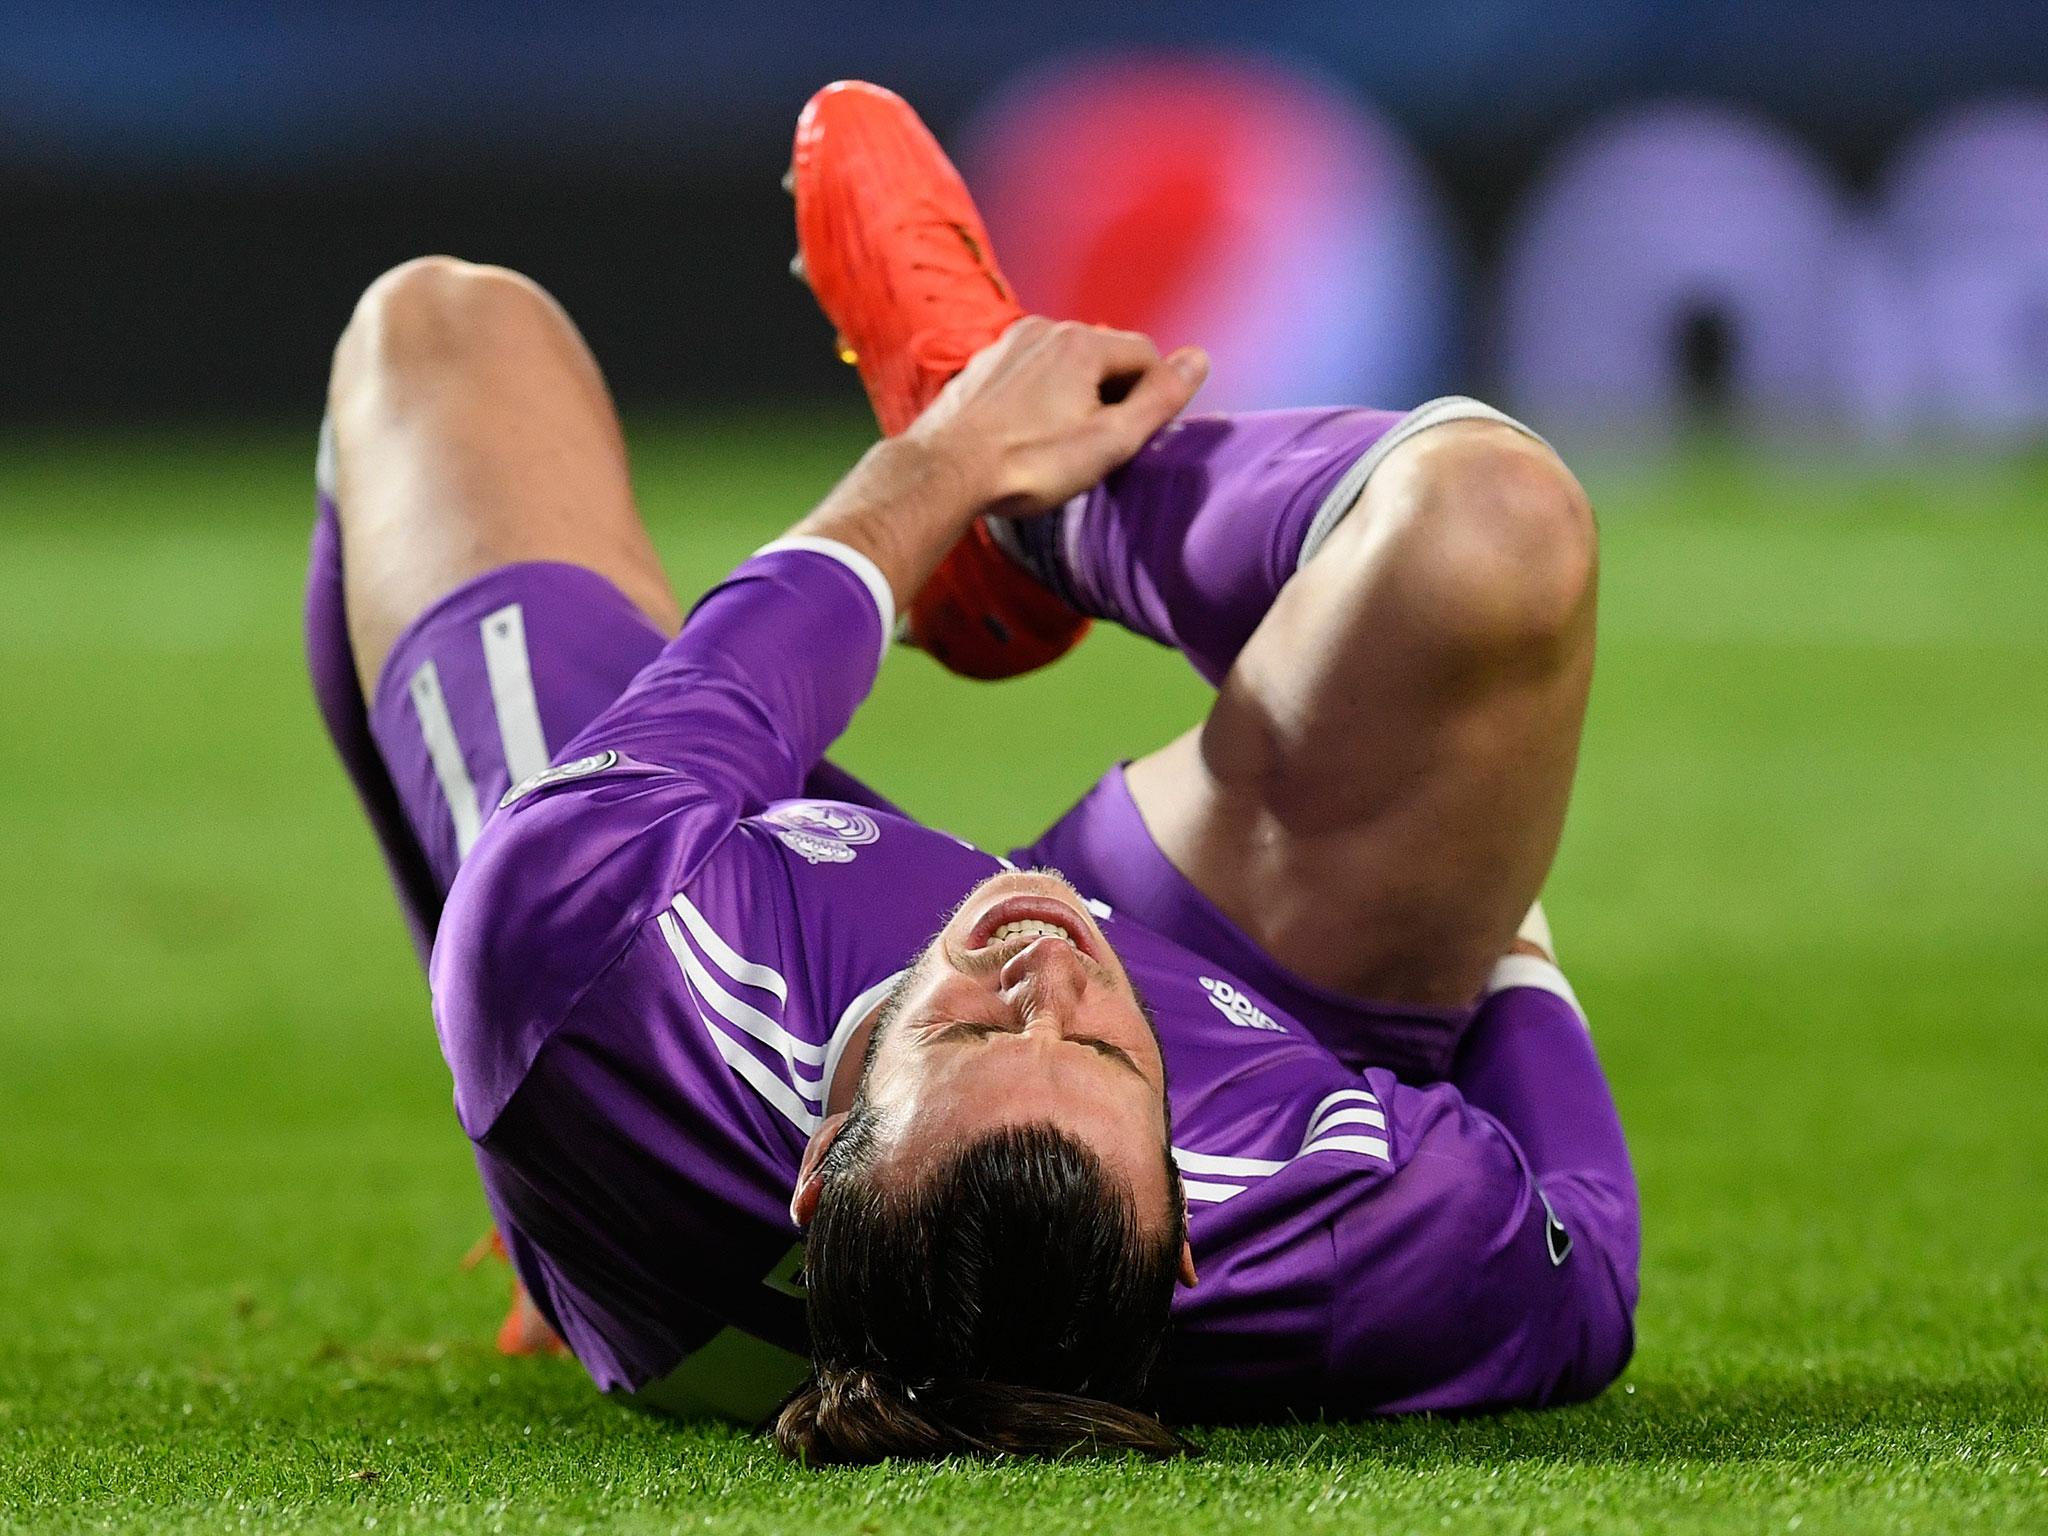 Gareth Bale has been out for two months already with a serious ankle injury